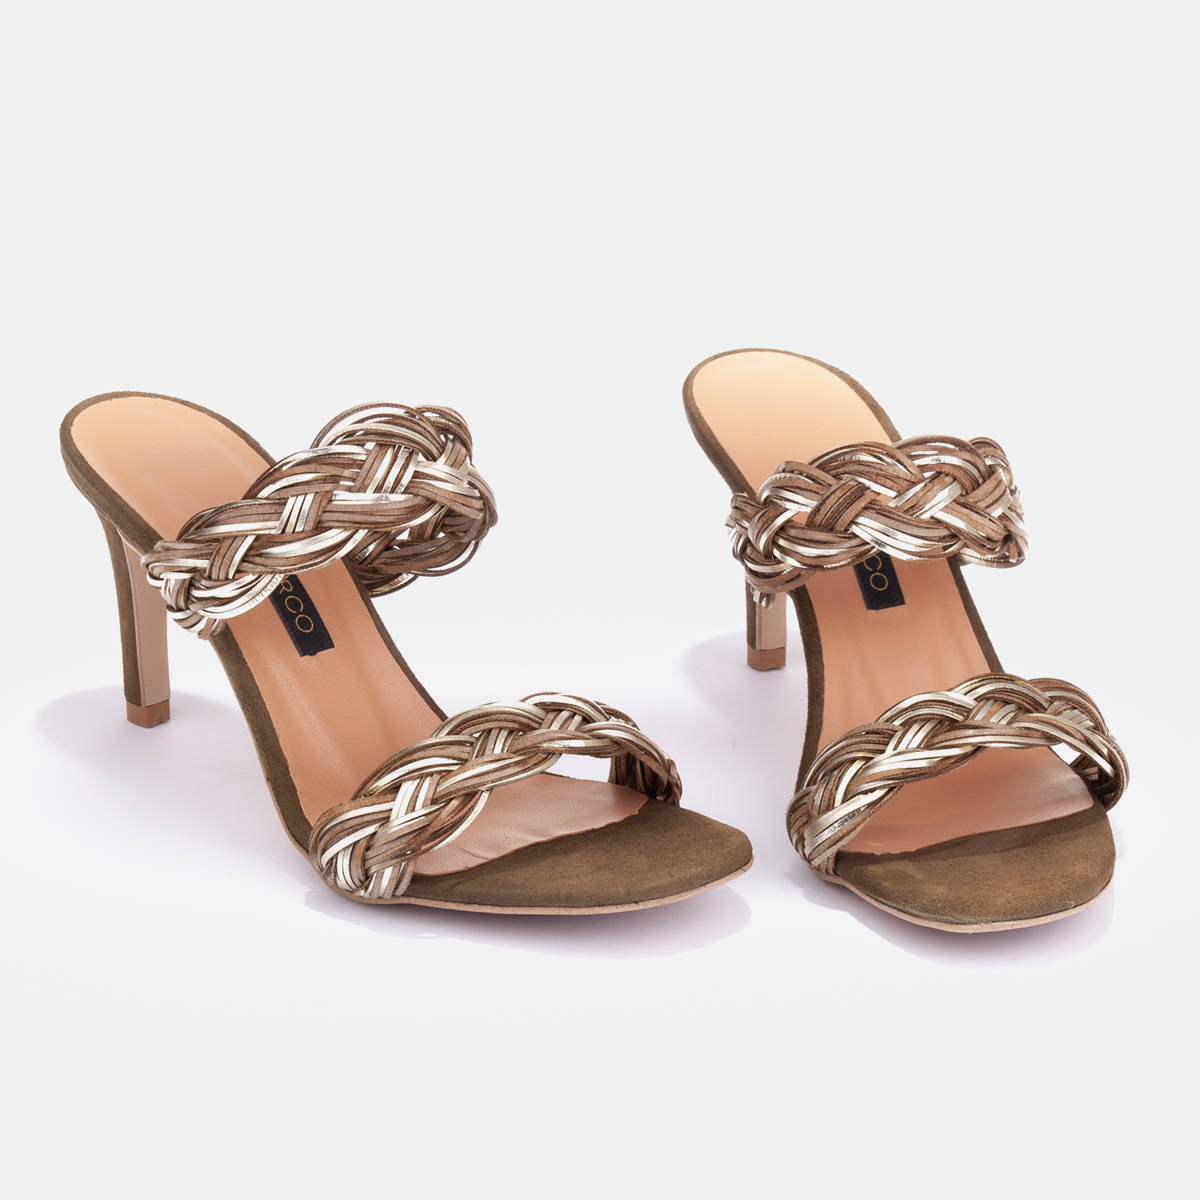 Sandals with braided straps